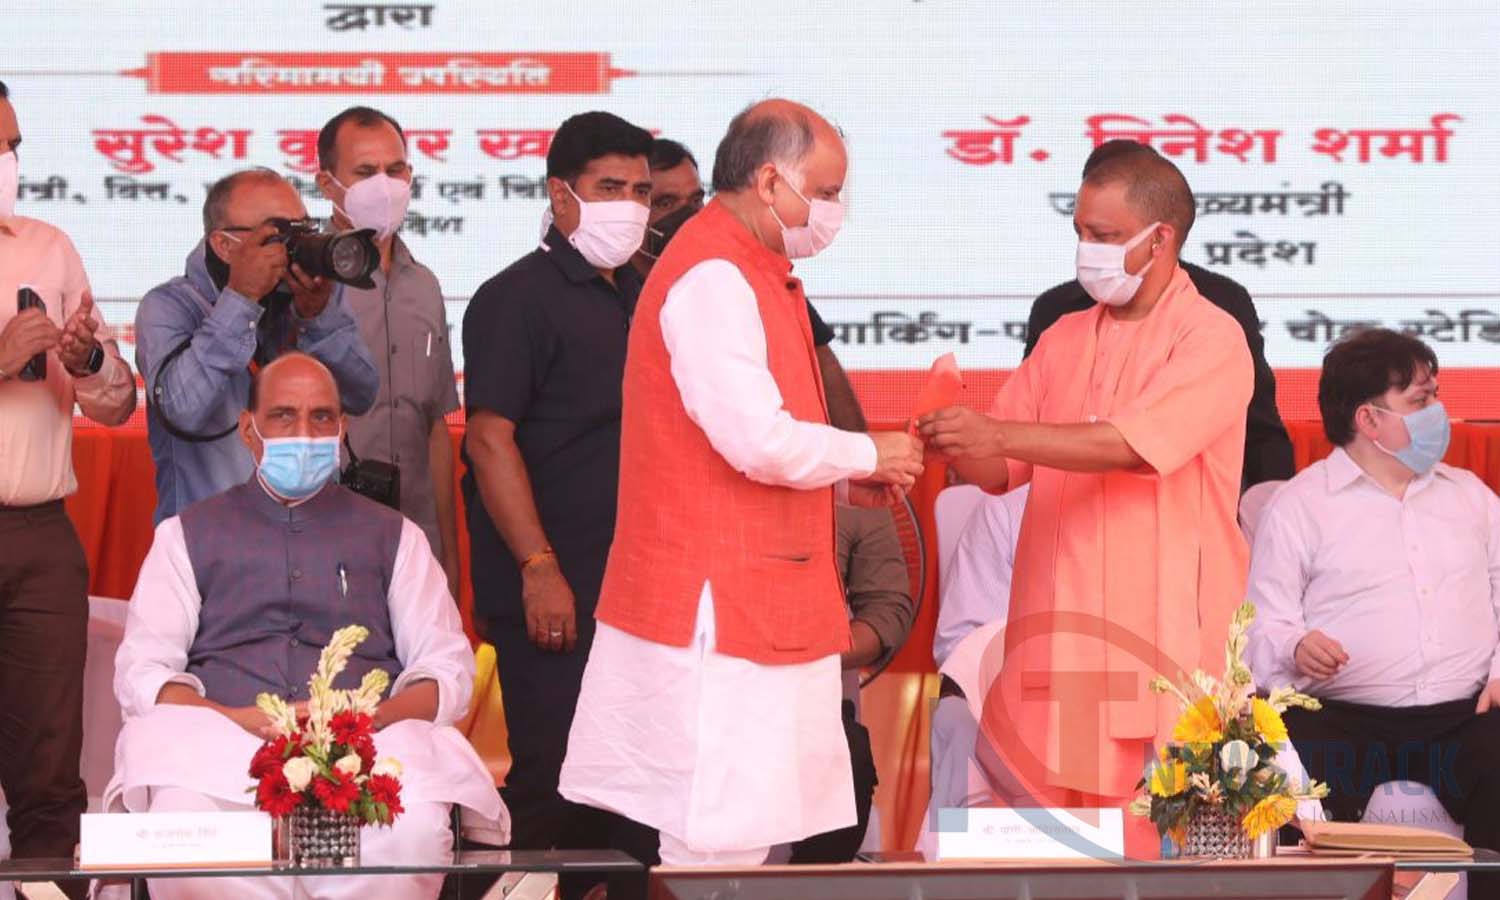 Project Inauguration and Foundation Stone Laying Program in Lucknow